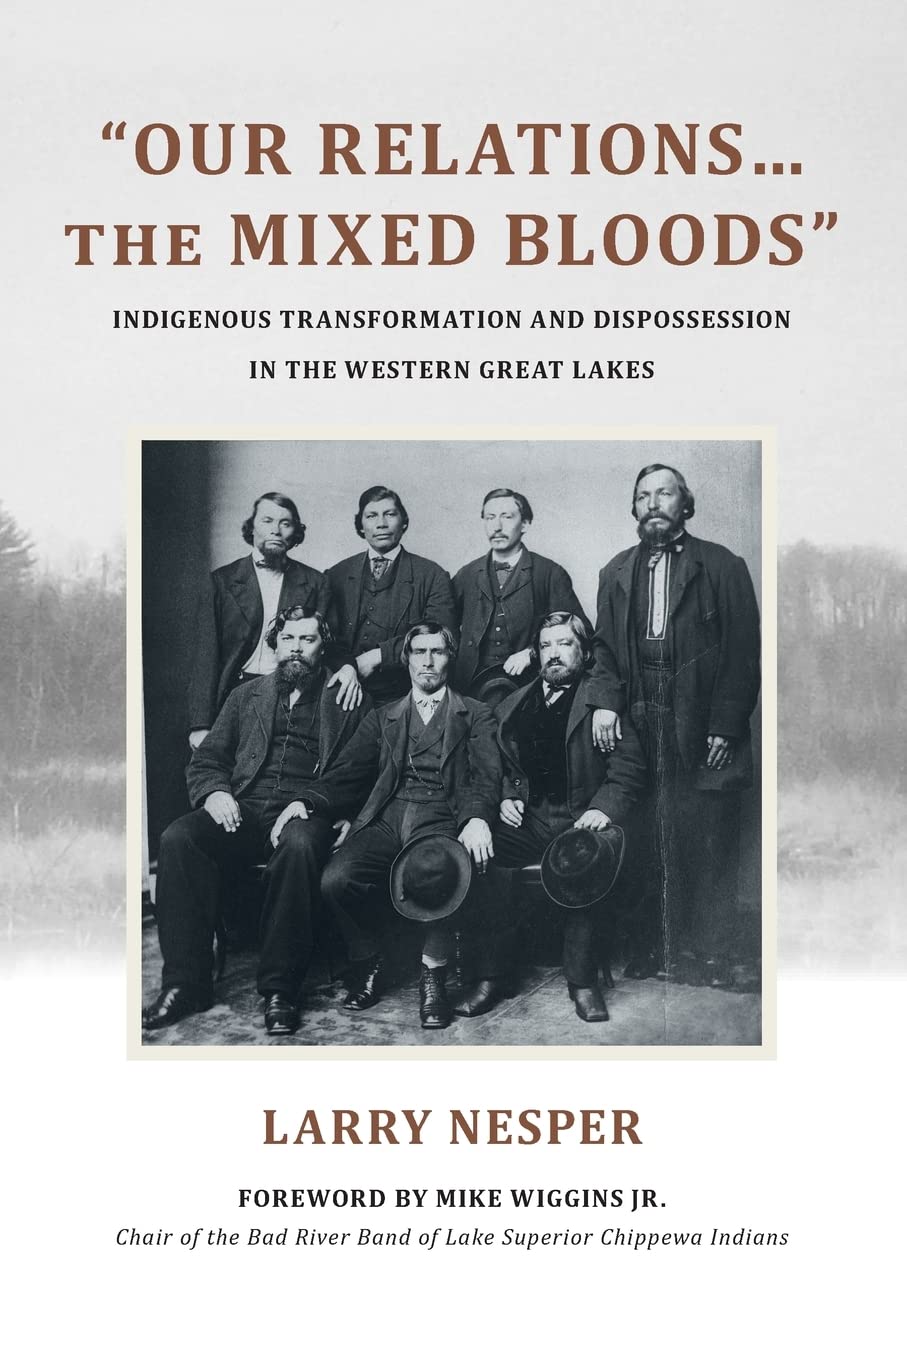 Our Relations...the Mixed Bloods: Indigenous Transformation and Dispossession in the Western Great Lakes by Larry Nesper